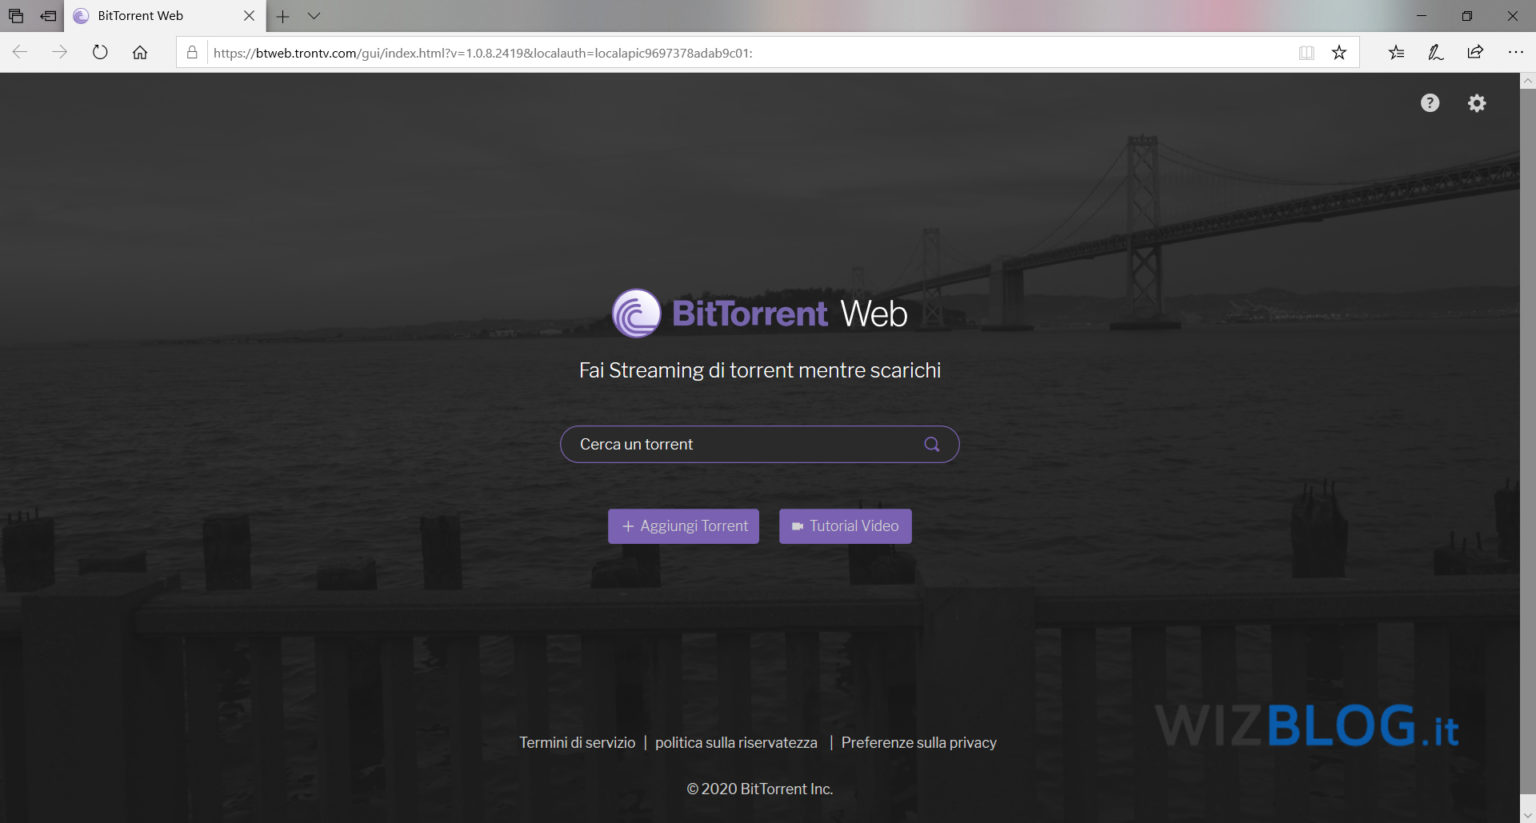 os x diable bittorrent web startup